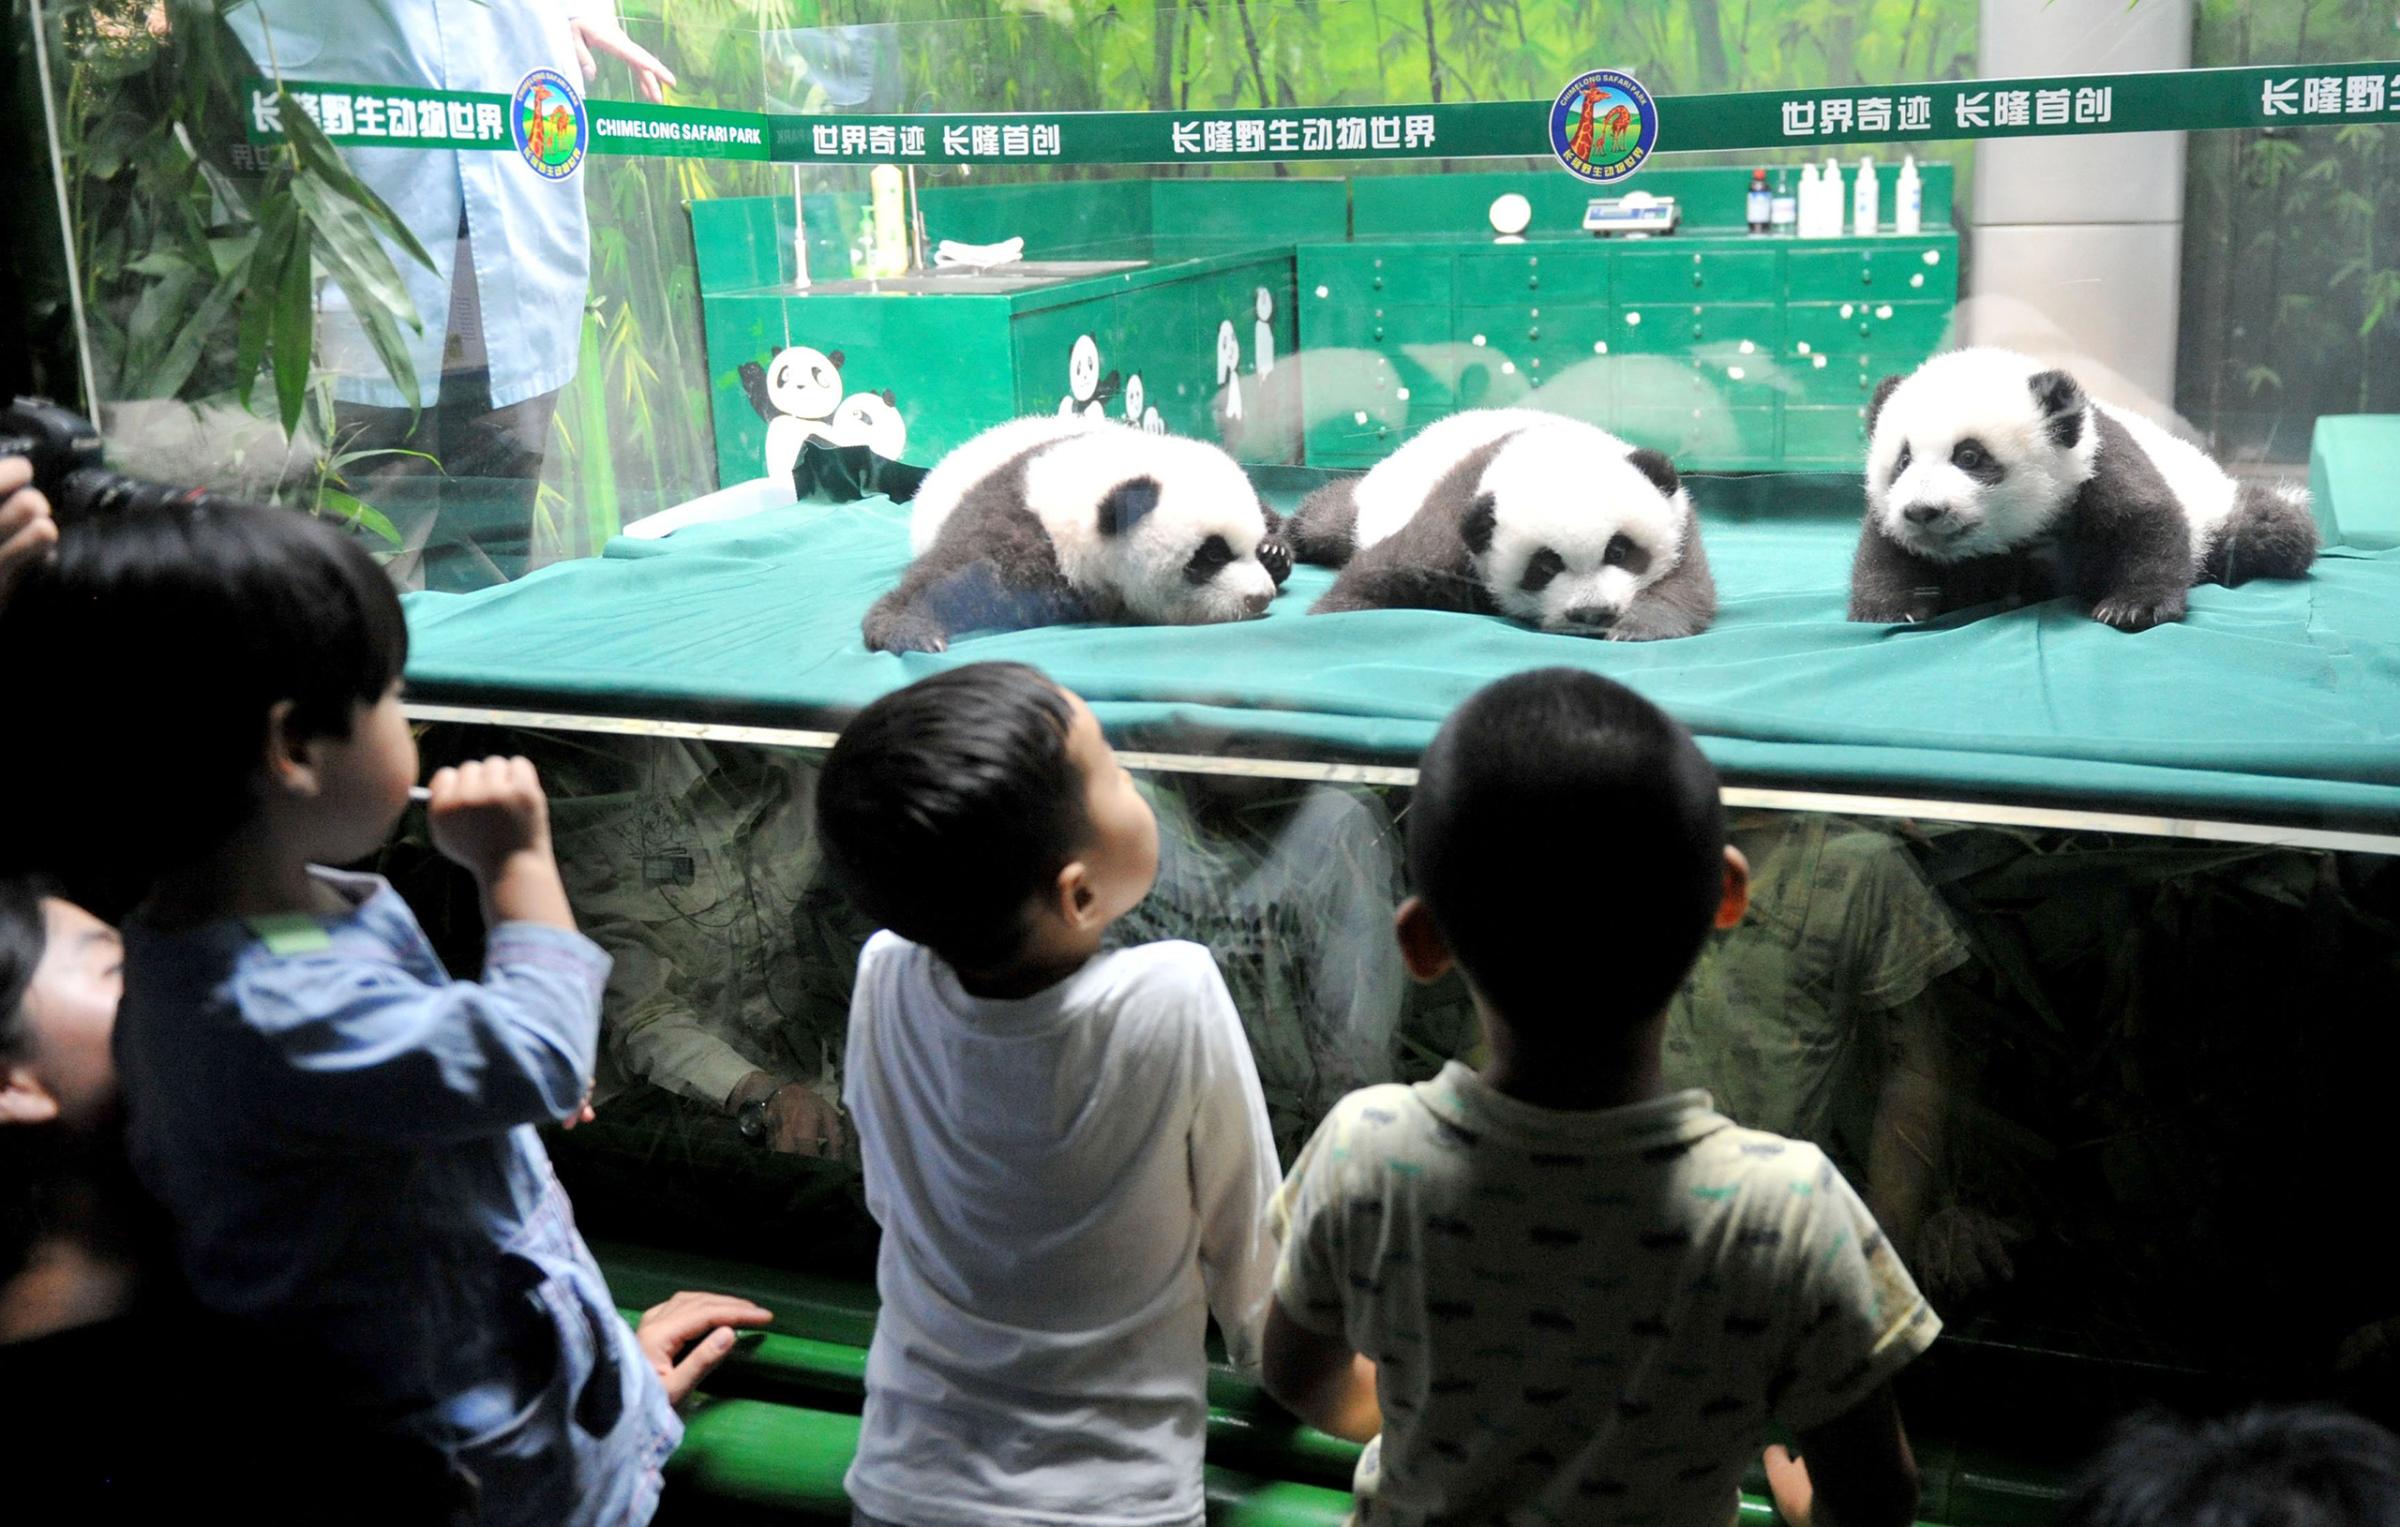 The world's only triplets baby pandas grow up healthily in Guangzhou, Guangdong, China on Nov. 5, 2014.